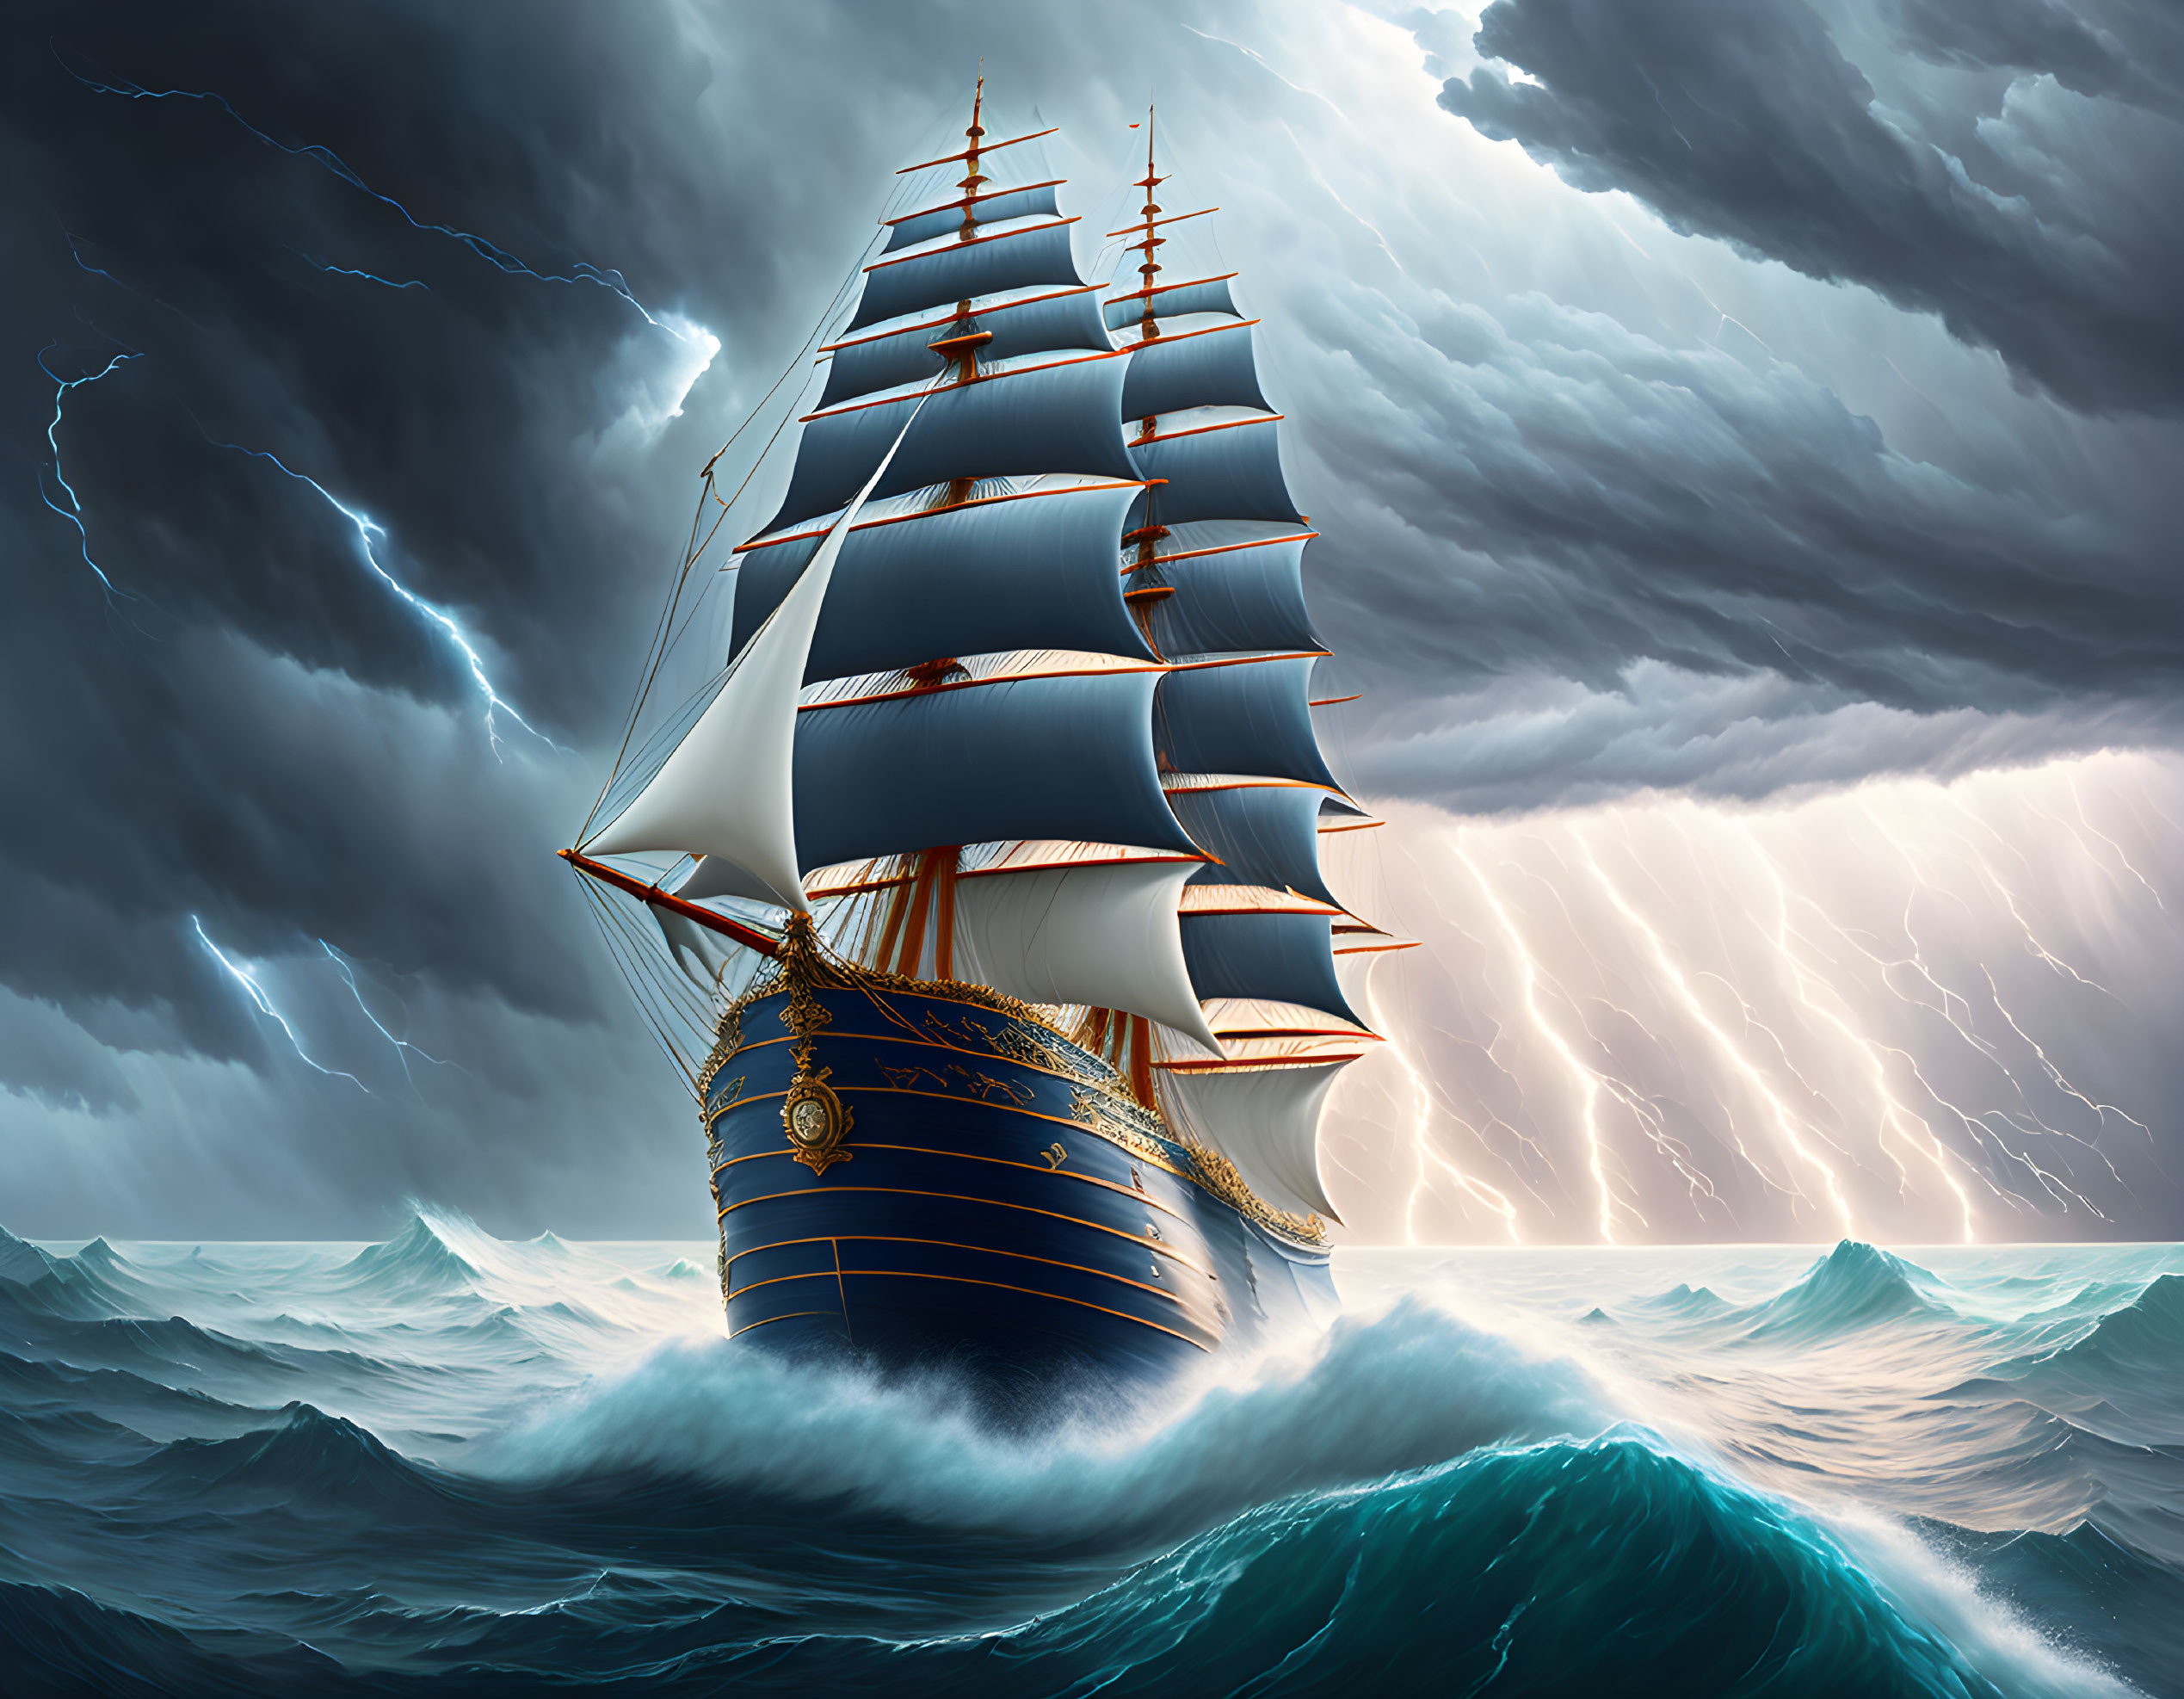 Sailing into the Storm